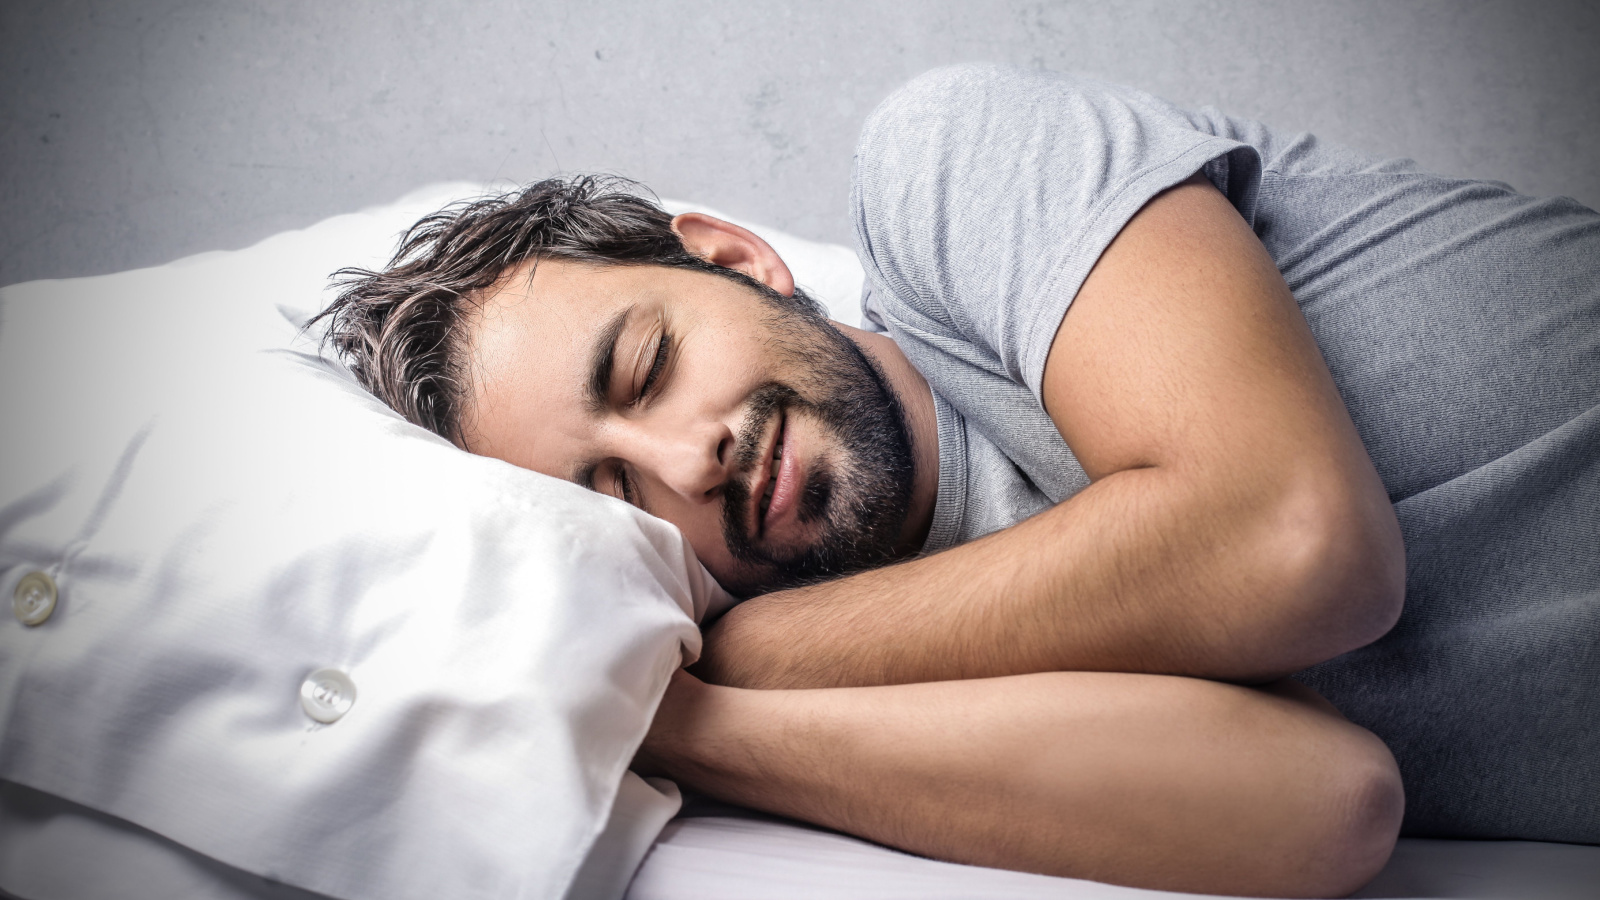 image credit: Ollyy/Shutterstock <p><span>Establish a consistent sleep schedule to ensure restorative rest. Quality sleep is crucial for emotional and physical health. Create a calming bedtime ritual and aim for 8 hours of sleep. Your mind and body will thank you.</span></p>